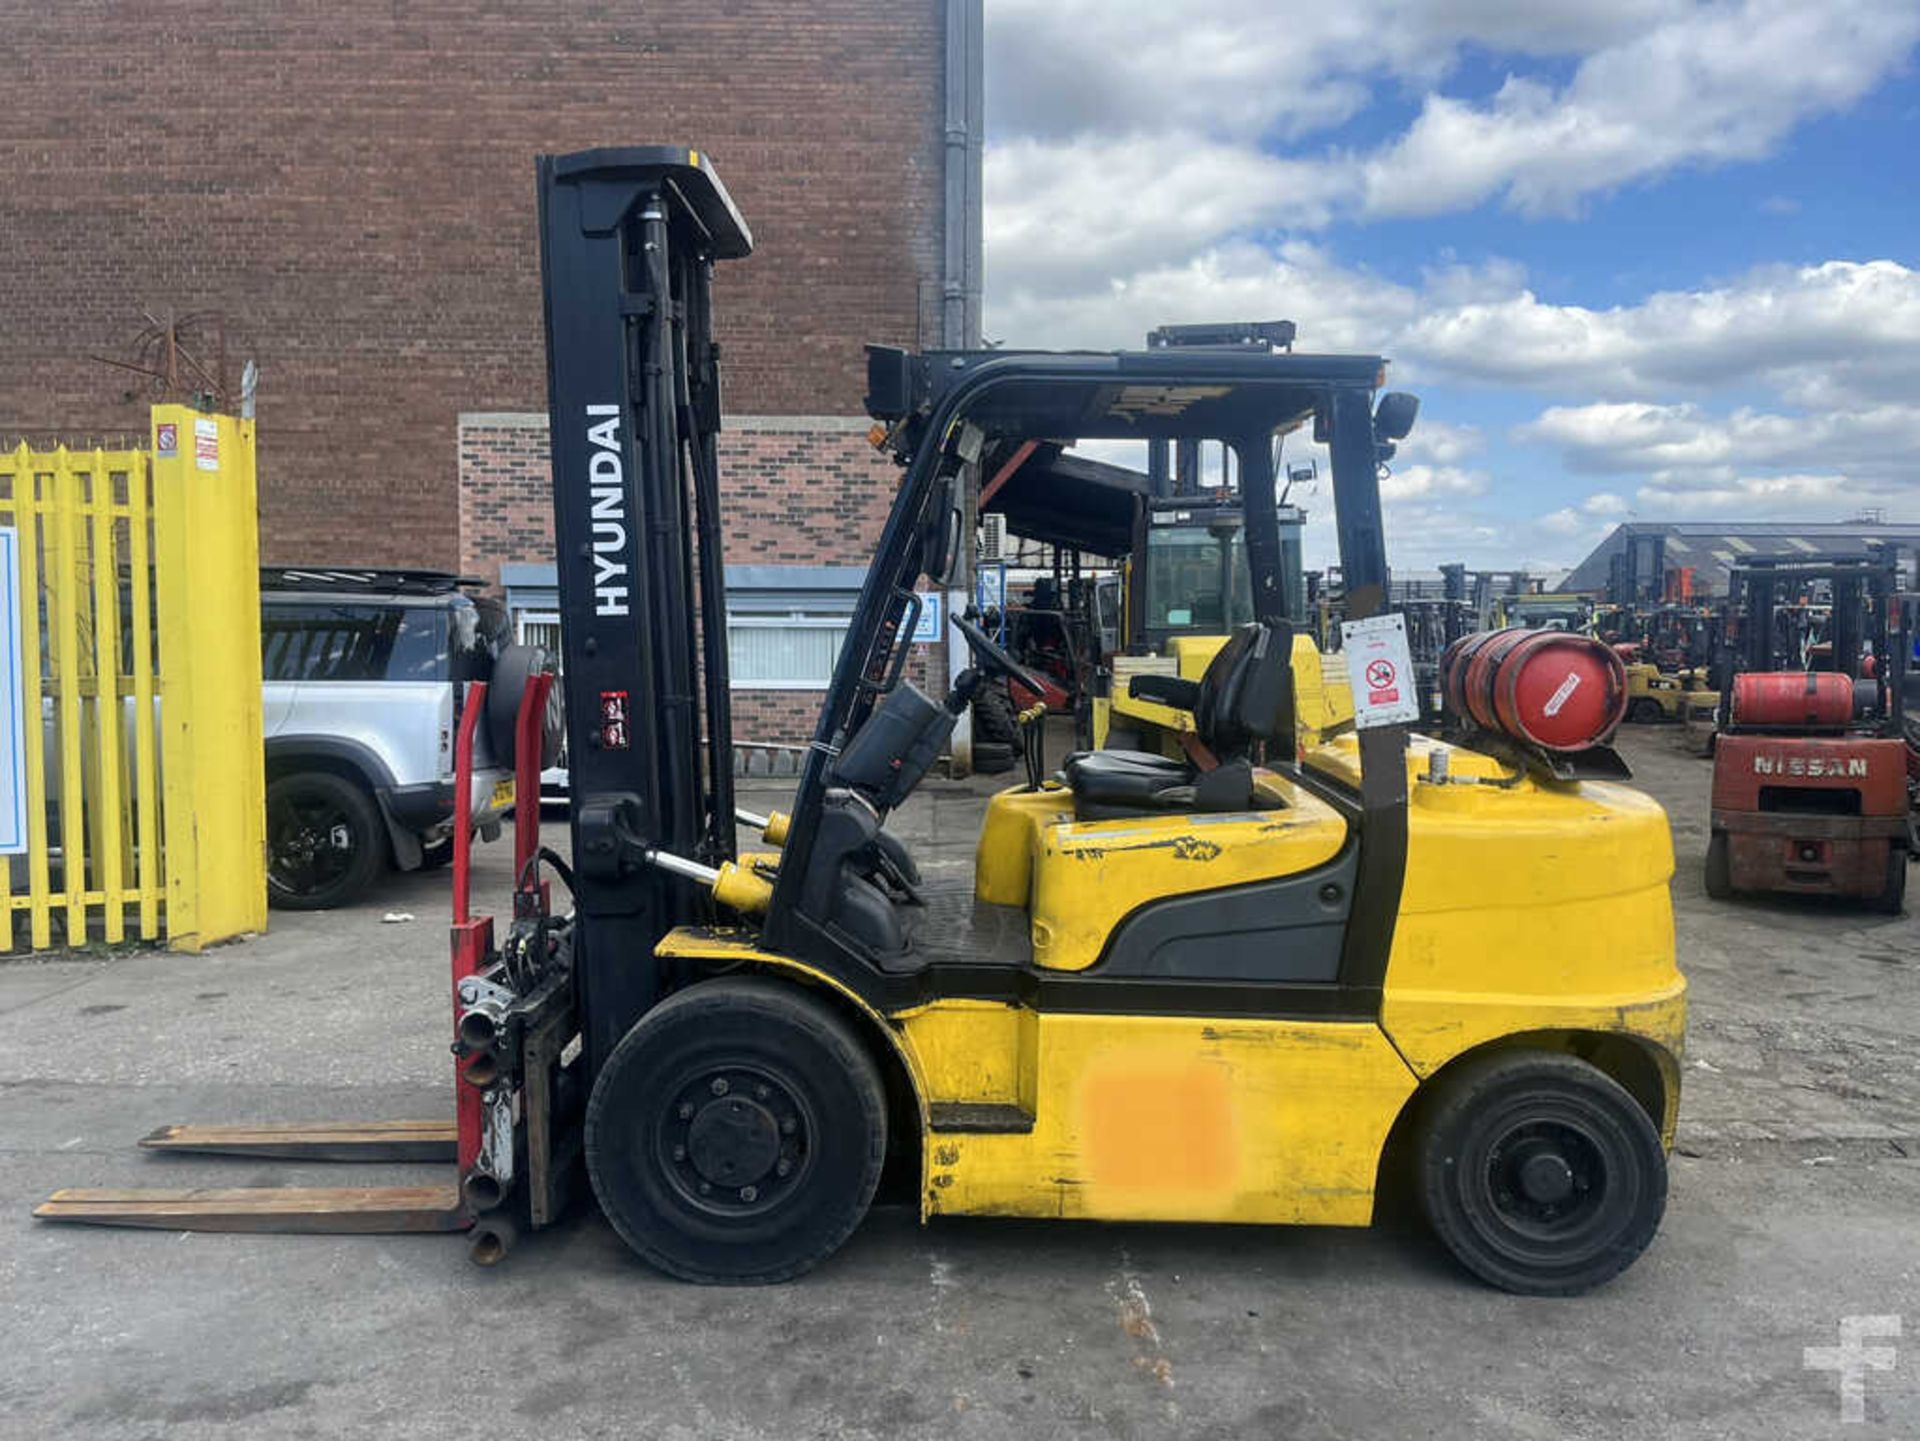 >>>SPECIAL CLEARANCE<<< 2016 LPG FORKLIFTS HYUNDAI 35L-7A